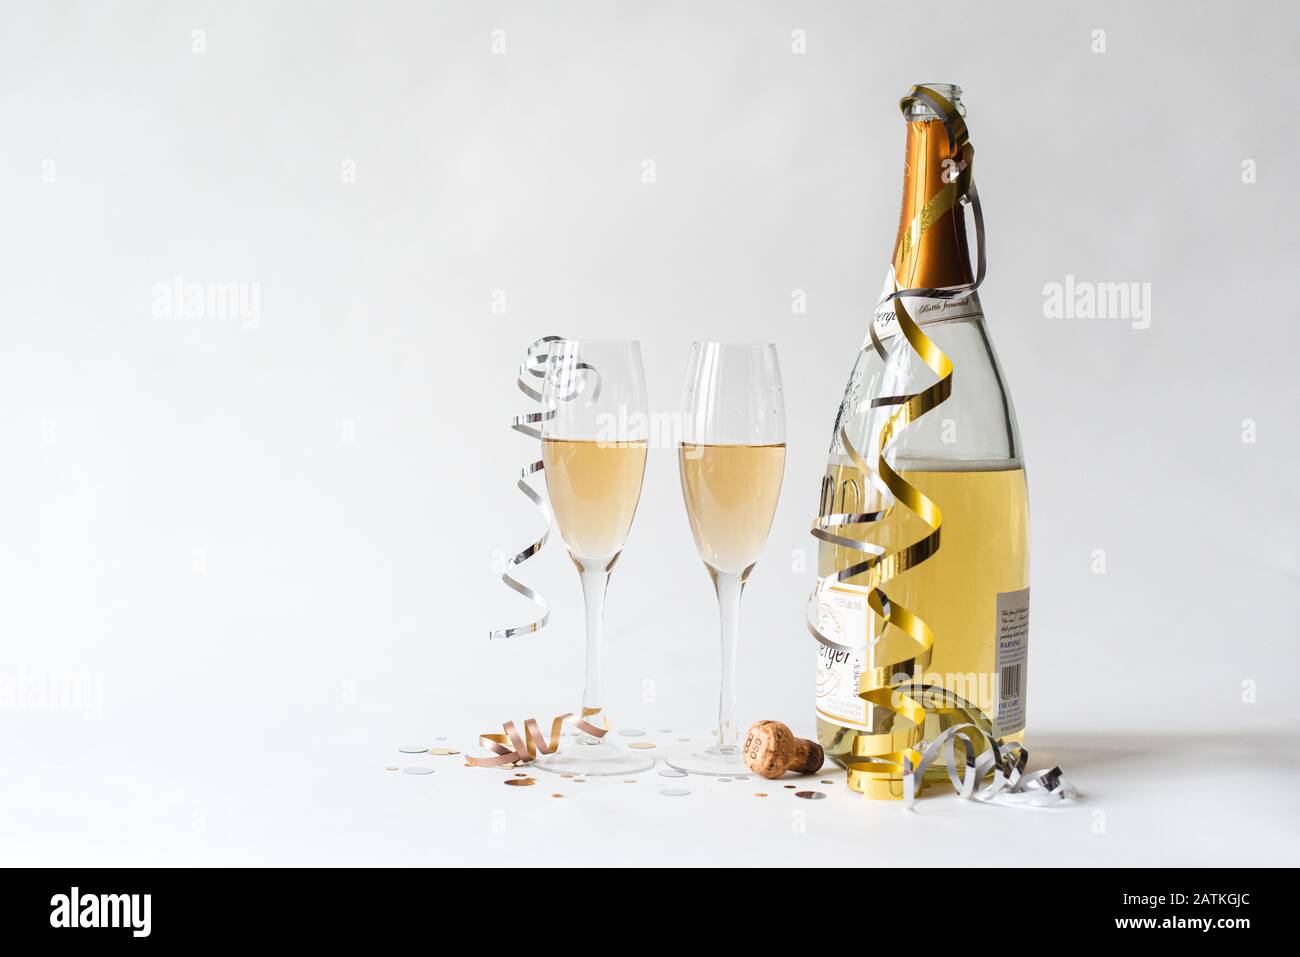 https://c8.alamy.com/comp/2ATKGJC/two-champagne-glasses-and-bottle-and-against-white-background-2ATKGJC.jpg